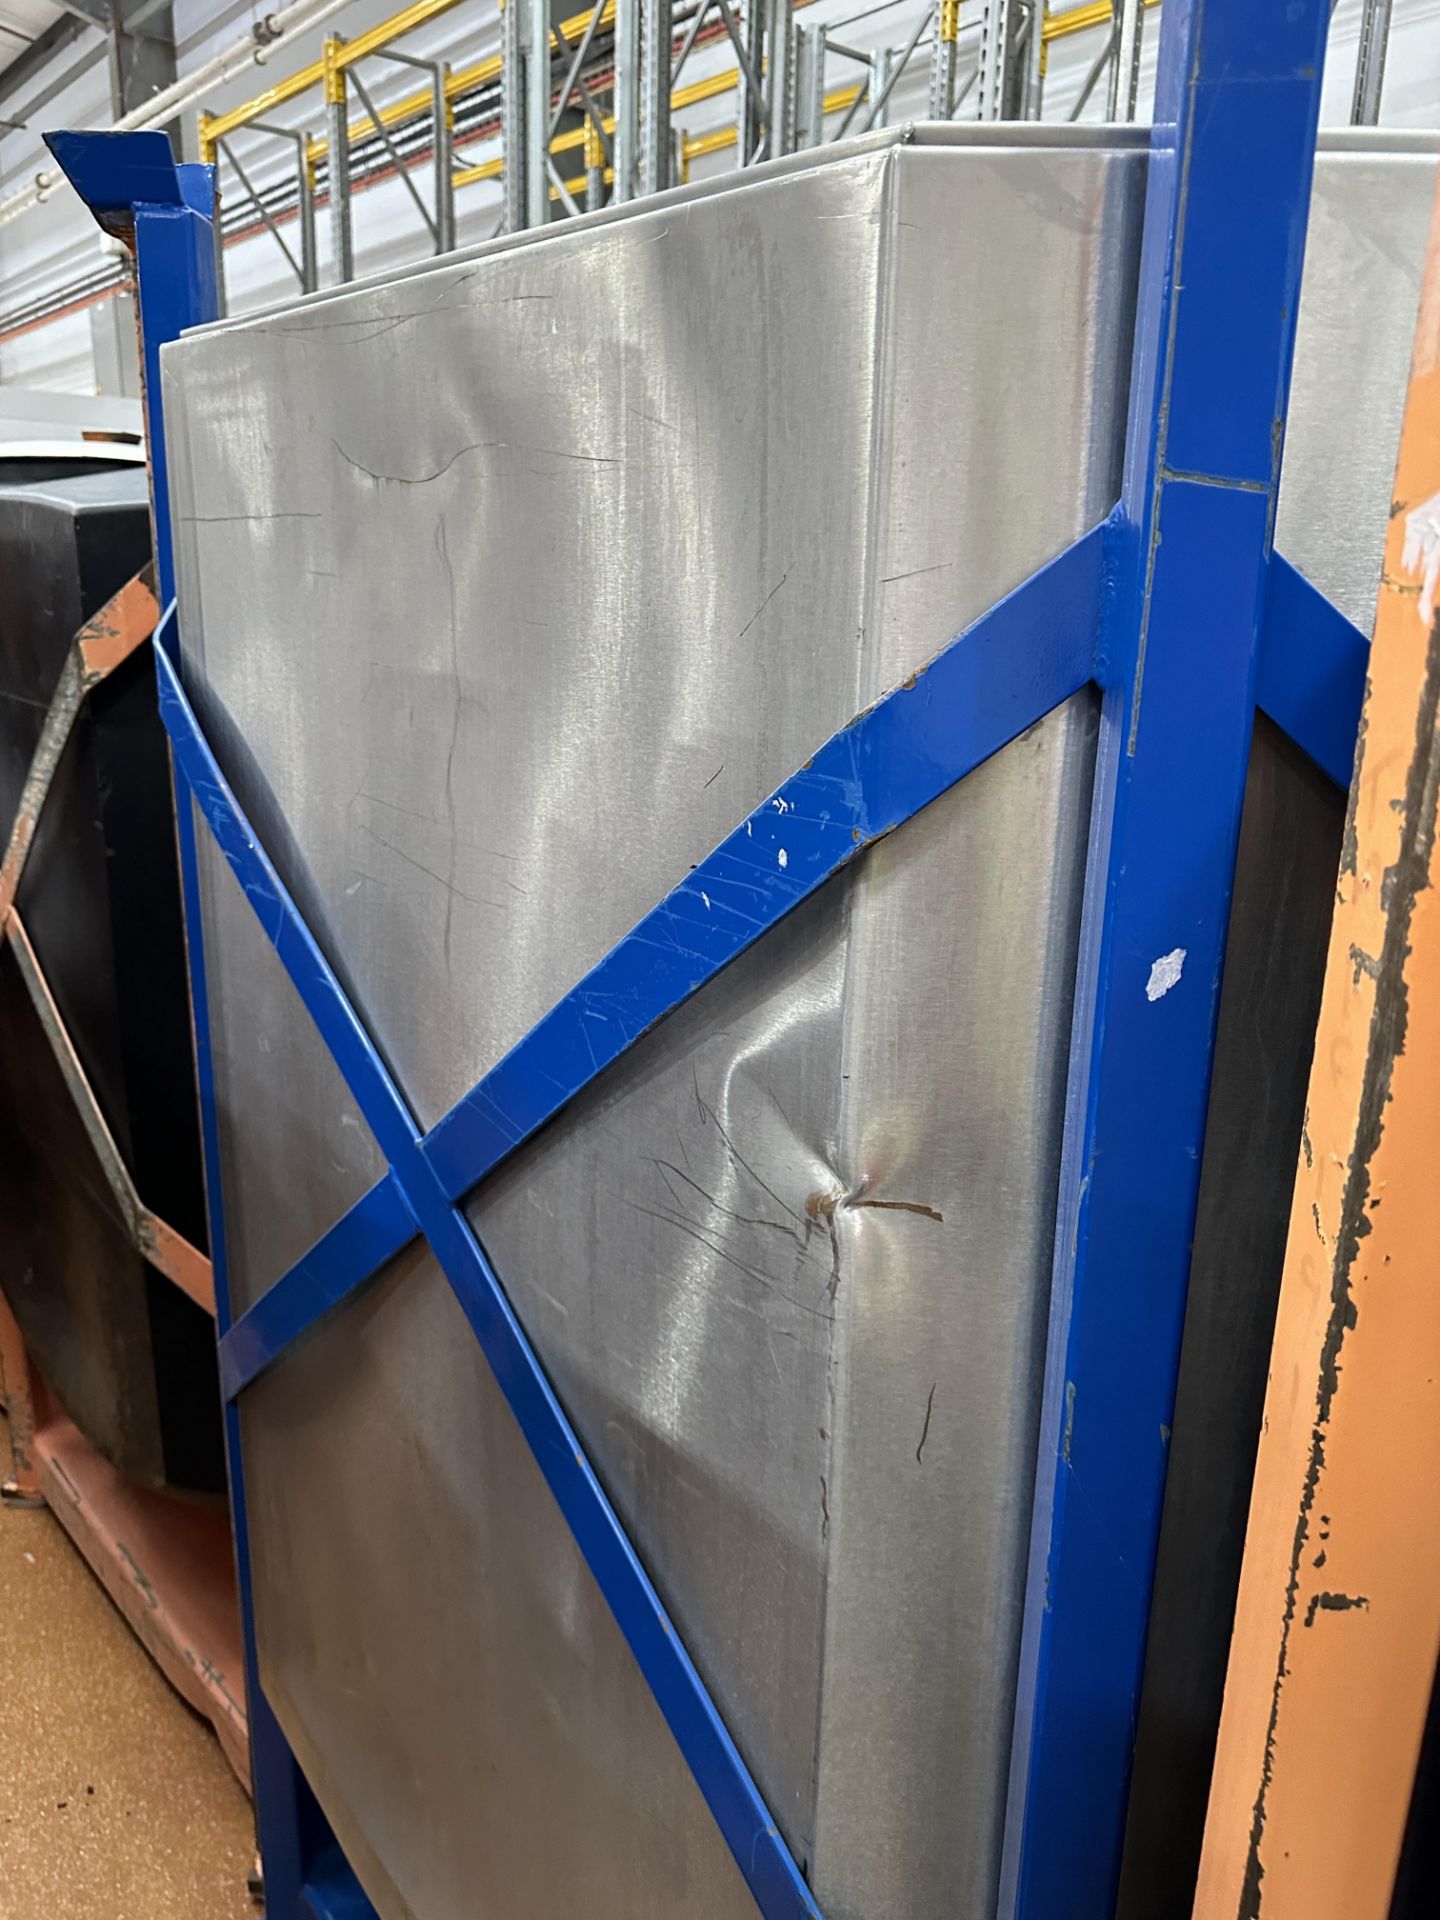 5 X FORKLIFTABLE FRAMES EACH HOLDING A S/S BIN. - Image 5 of 5